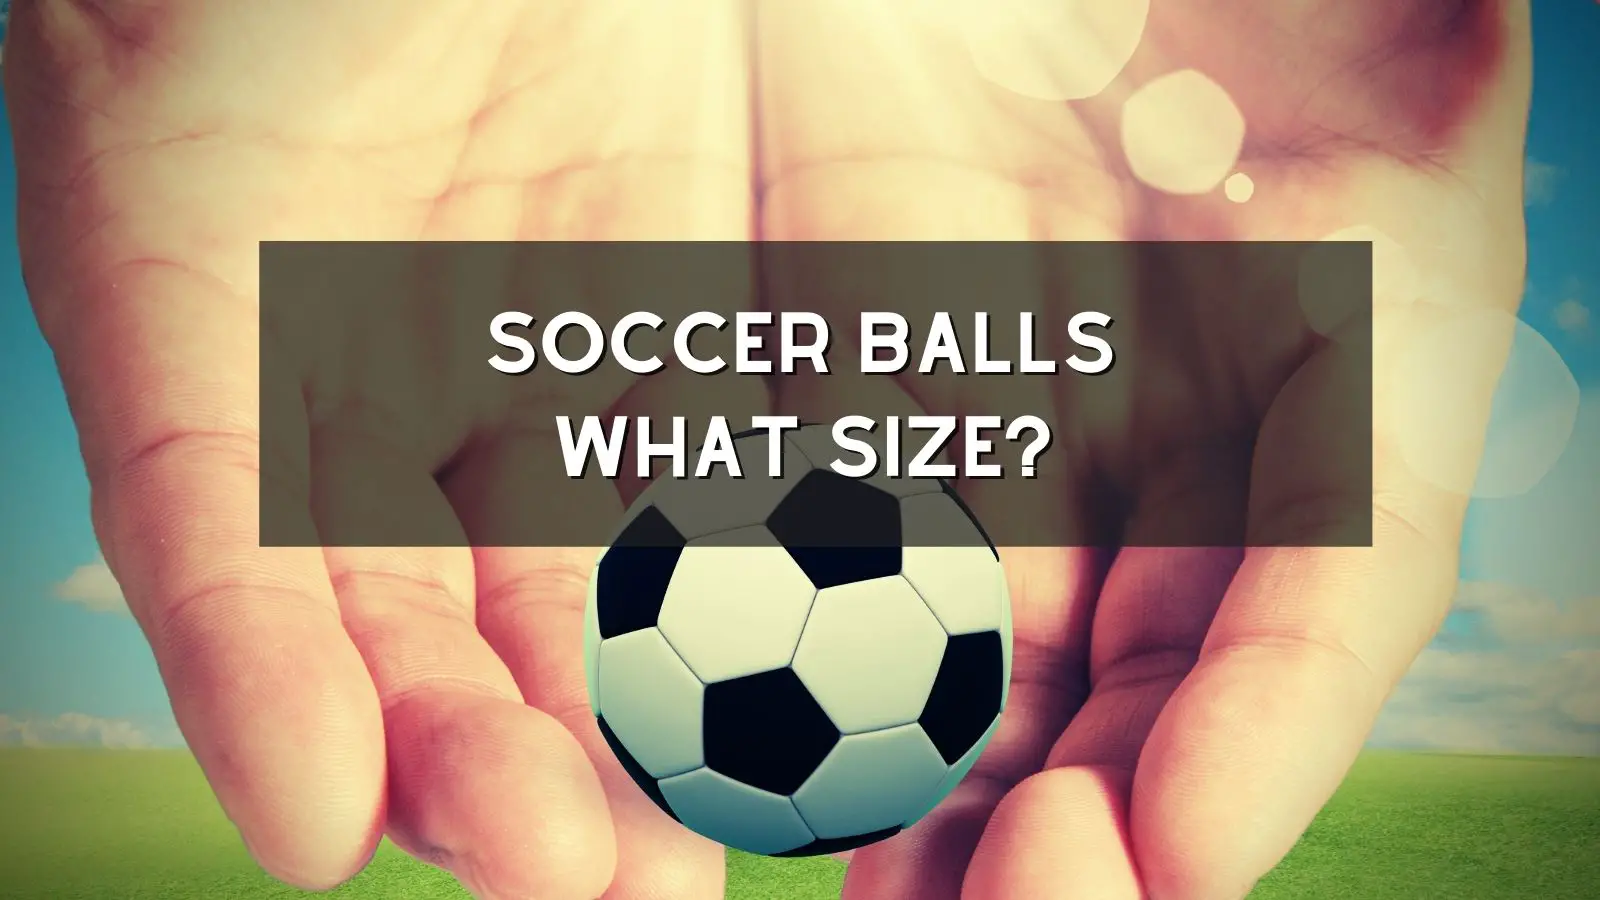 What Size Soccer Ball Should A Child Age 3, 4, 5, 6 Be Using?